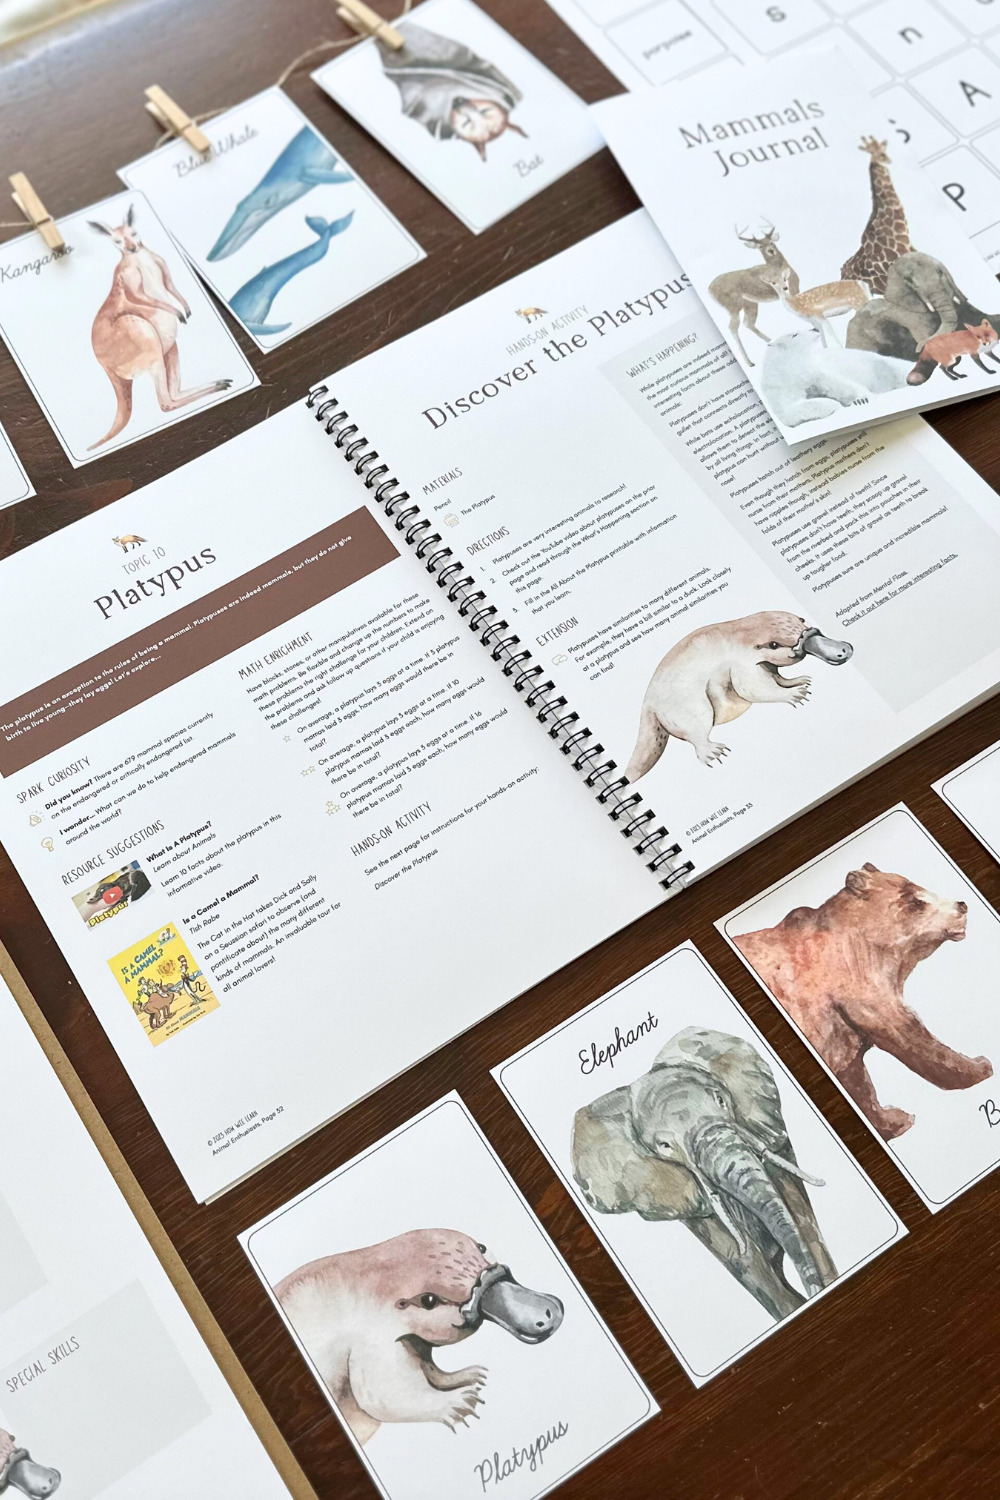 What is a mammal? Learn all about mammals through this hands-on Family Unit Study!